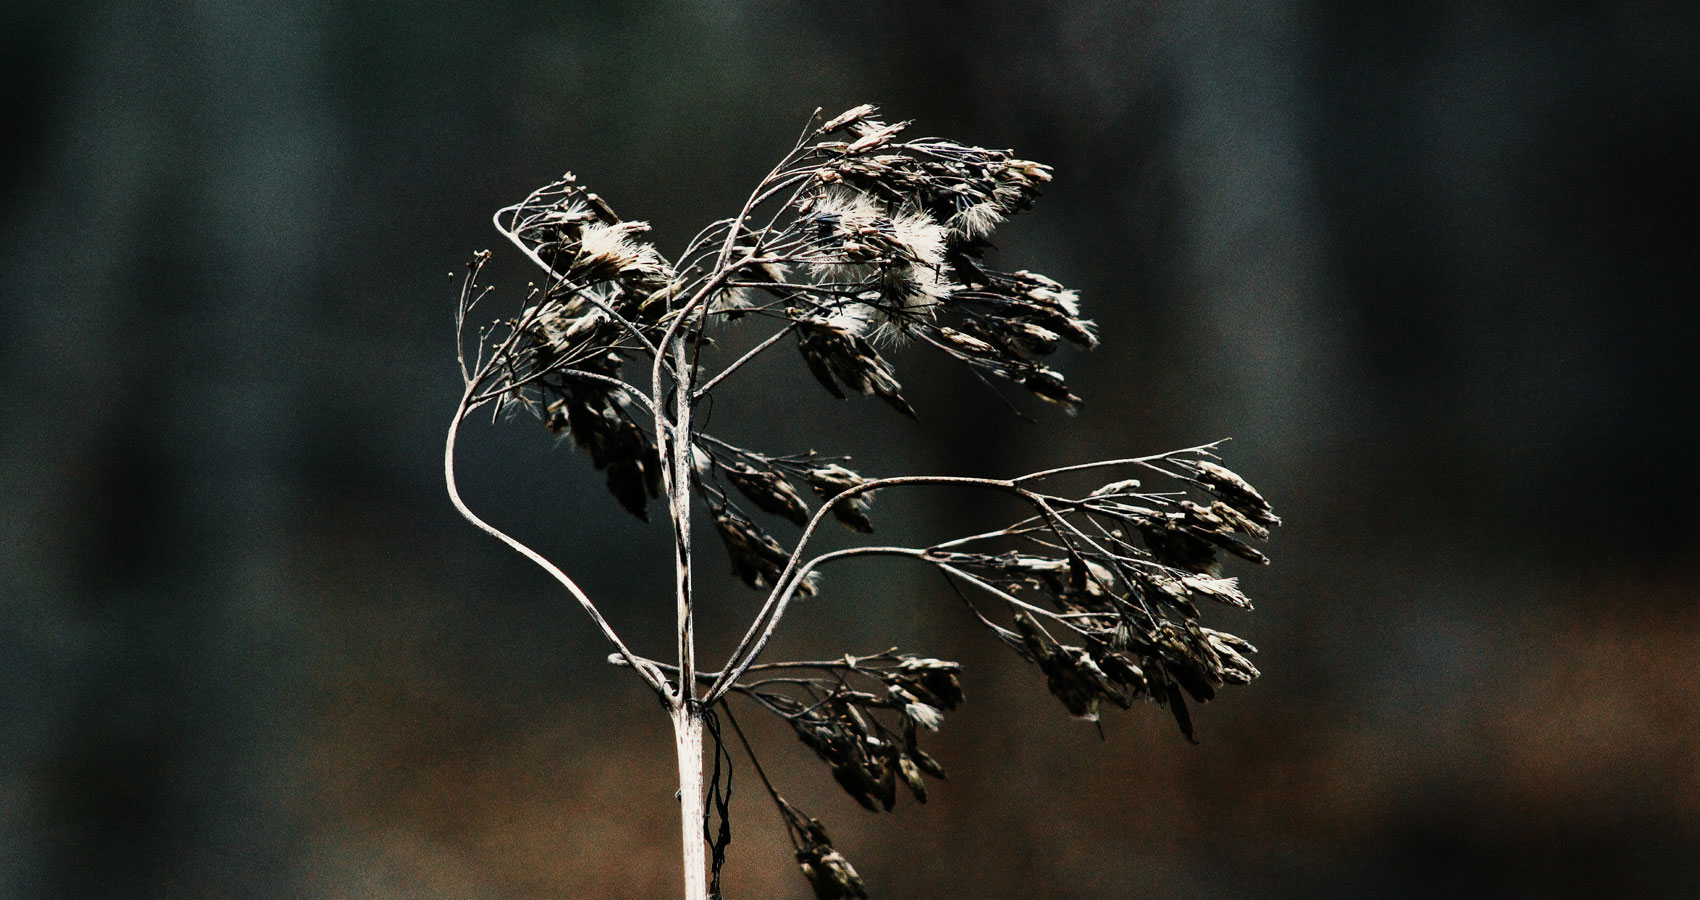 Dead Flora, Dying Fauna, poetry written by Lei Writses at Spillwords.com